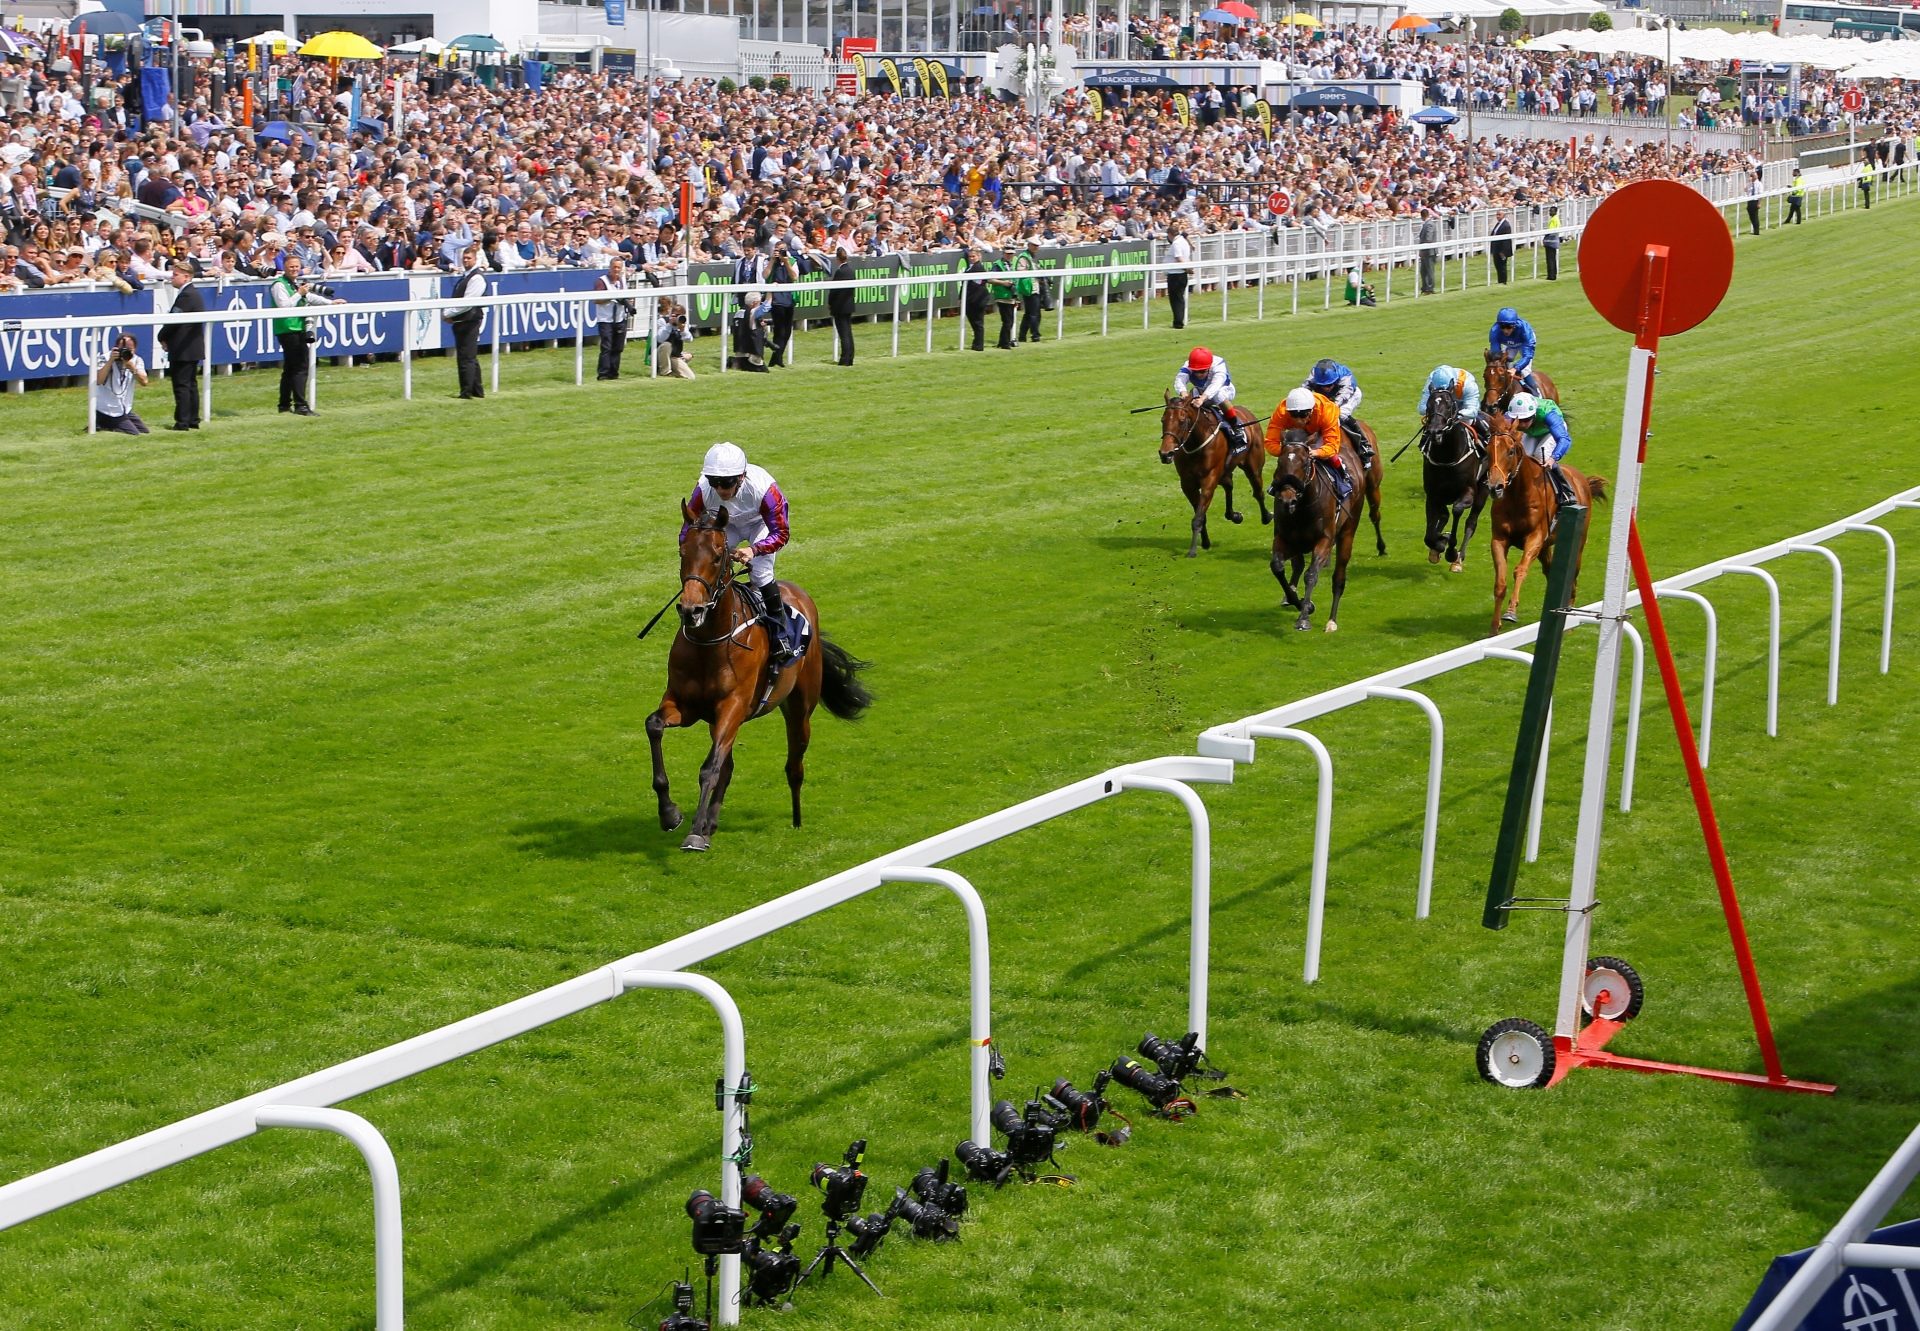 Cosmic Law (No Nay Never) winning the Woodcote Stakes at Epsom